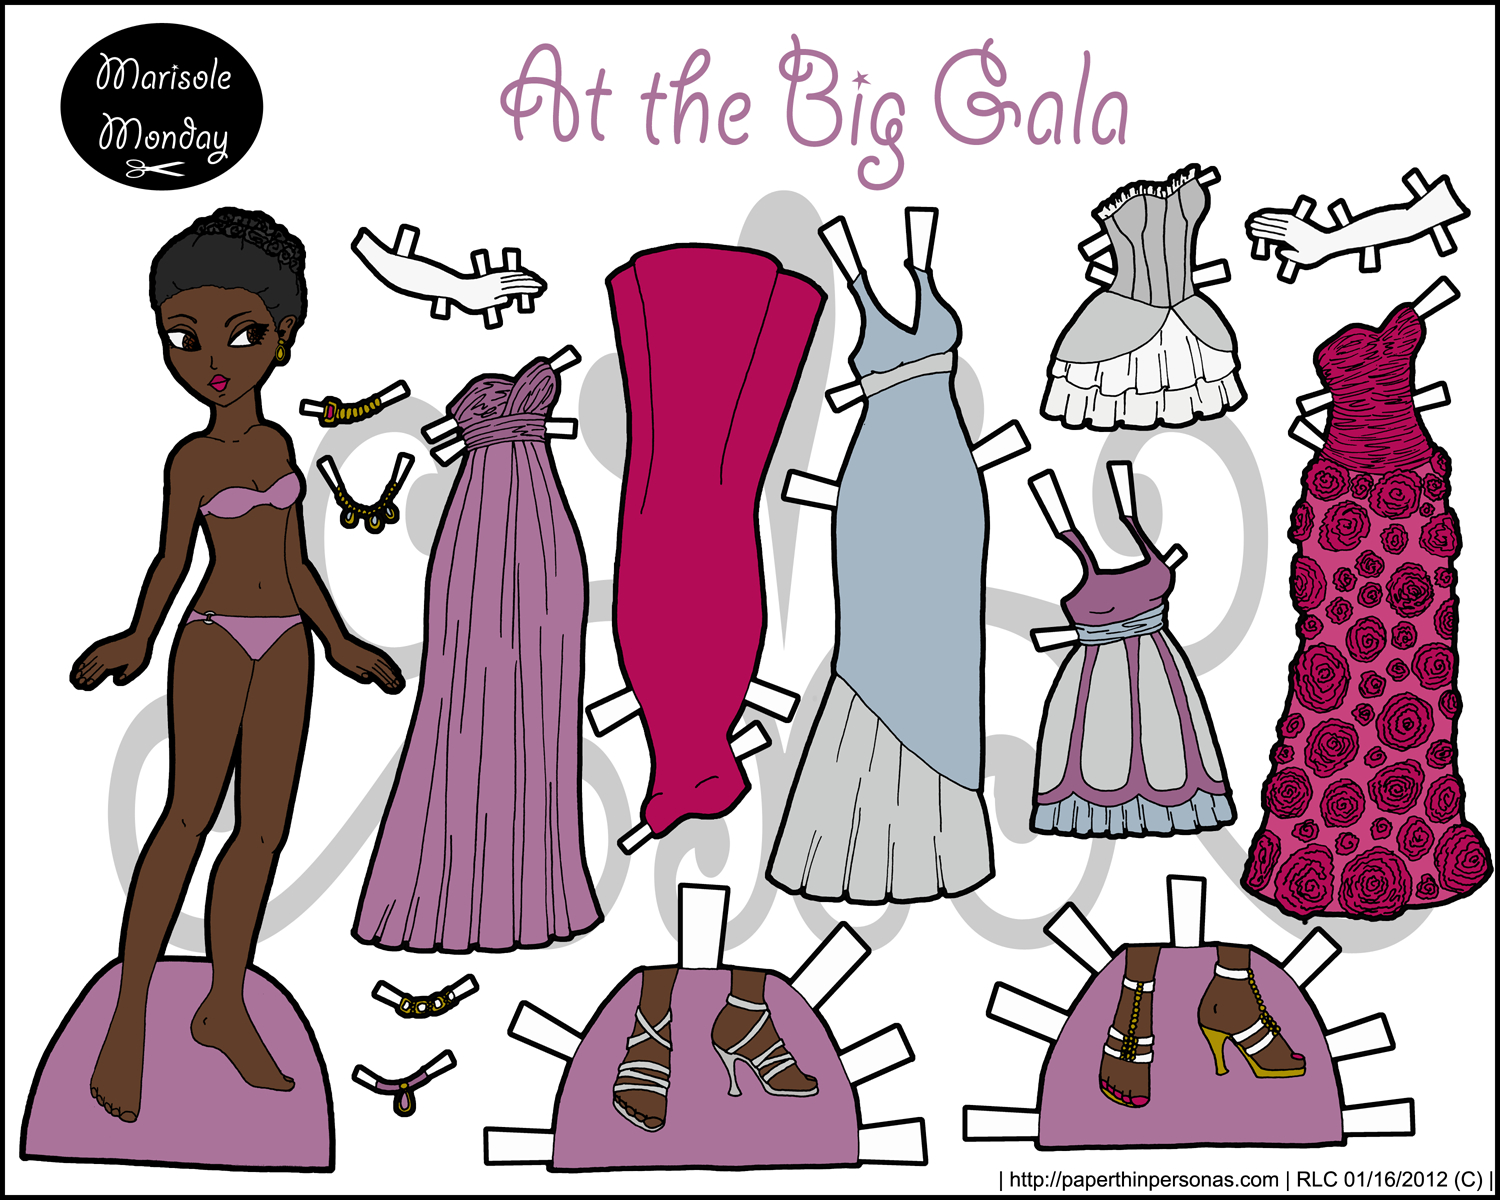 Free Printable Paper Doll- Marisole Monday - Free Printable Paper Dolls From Around The World